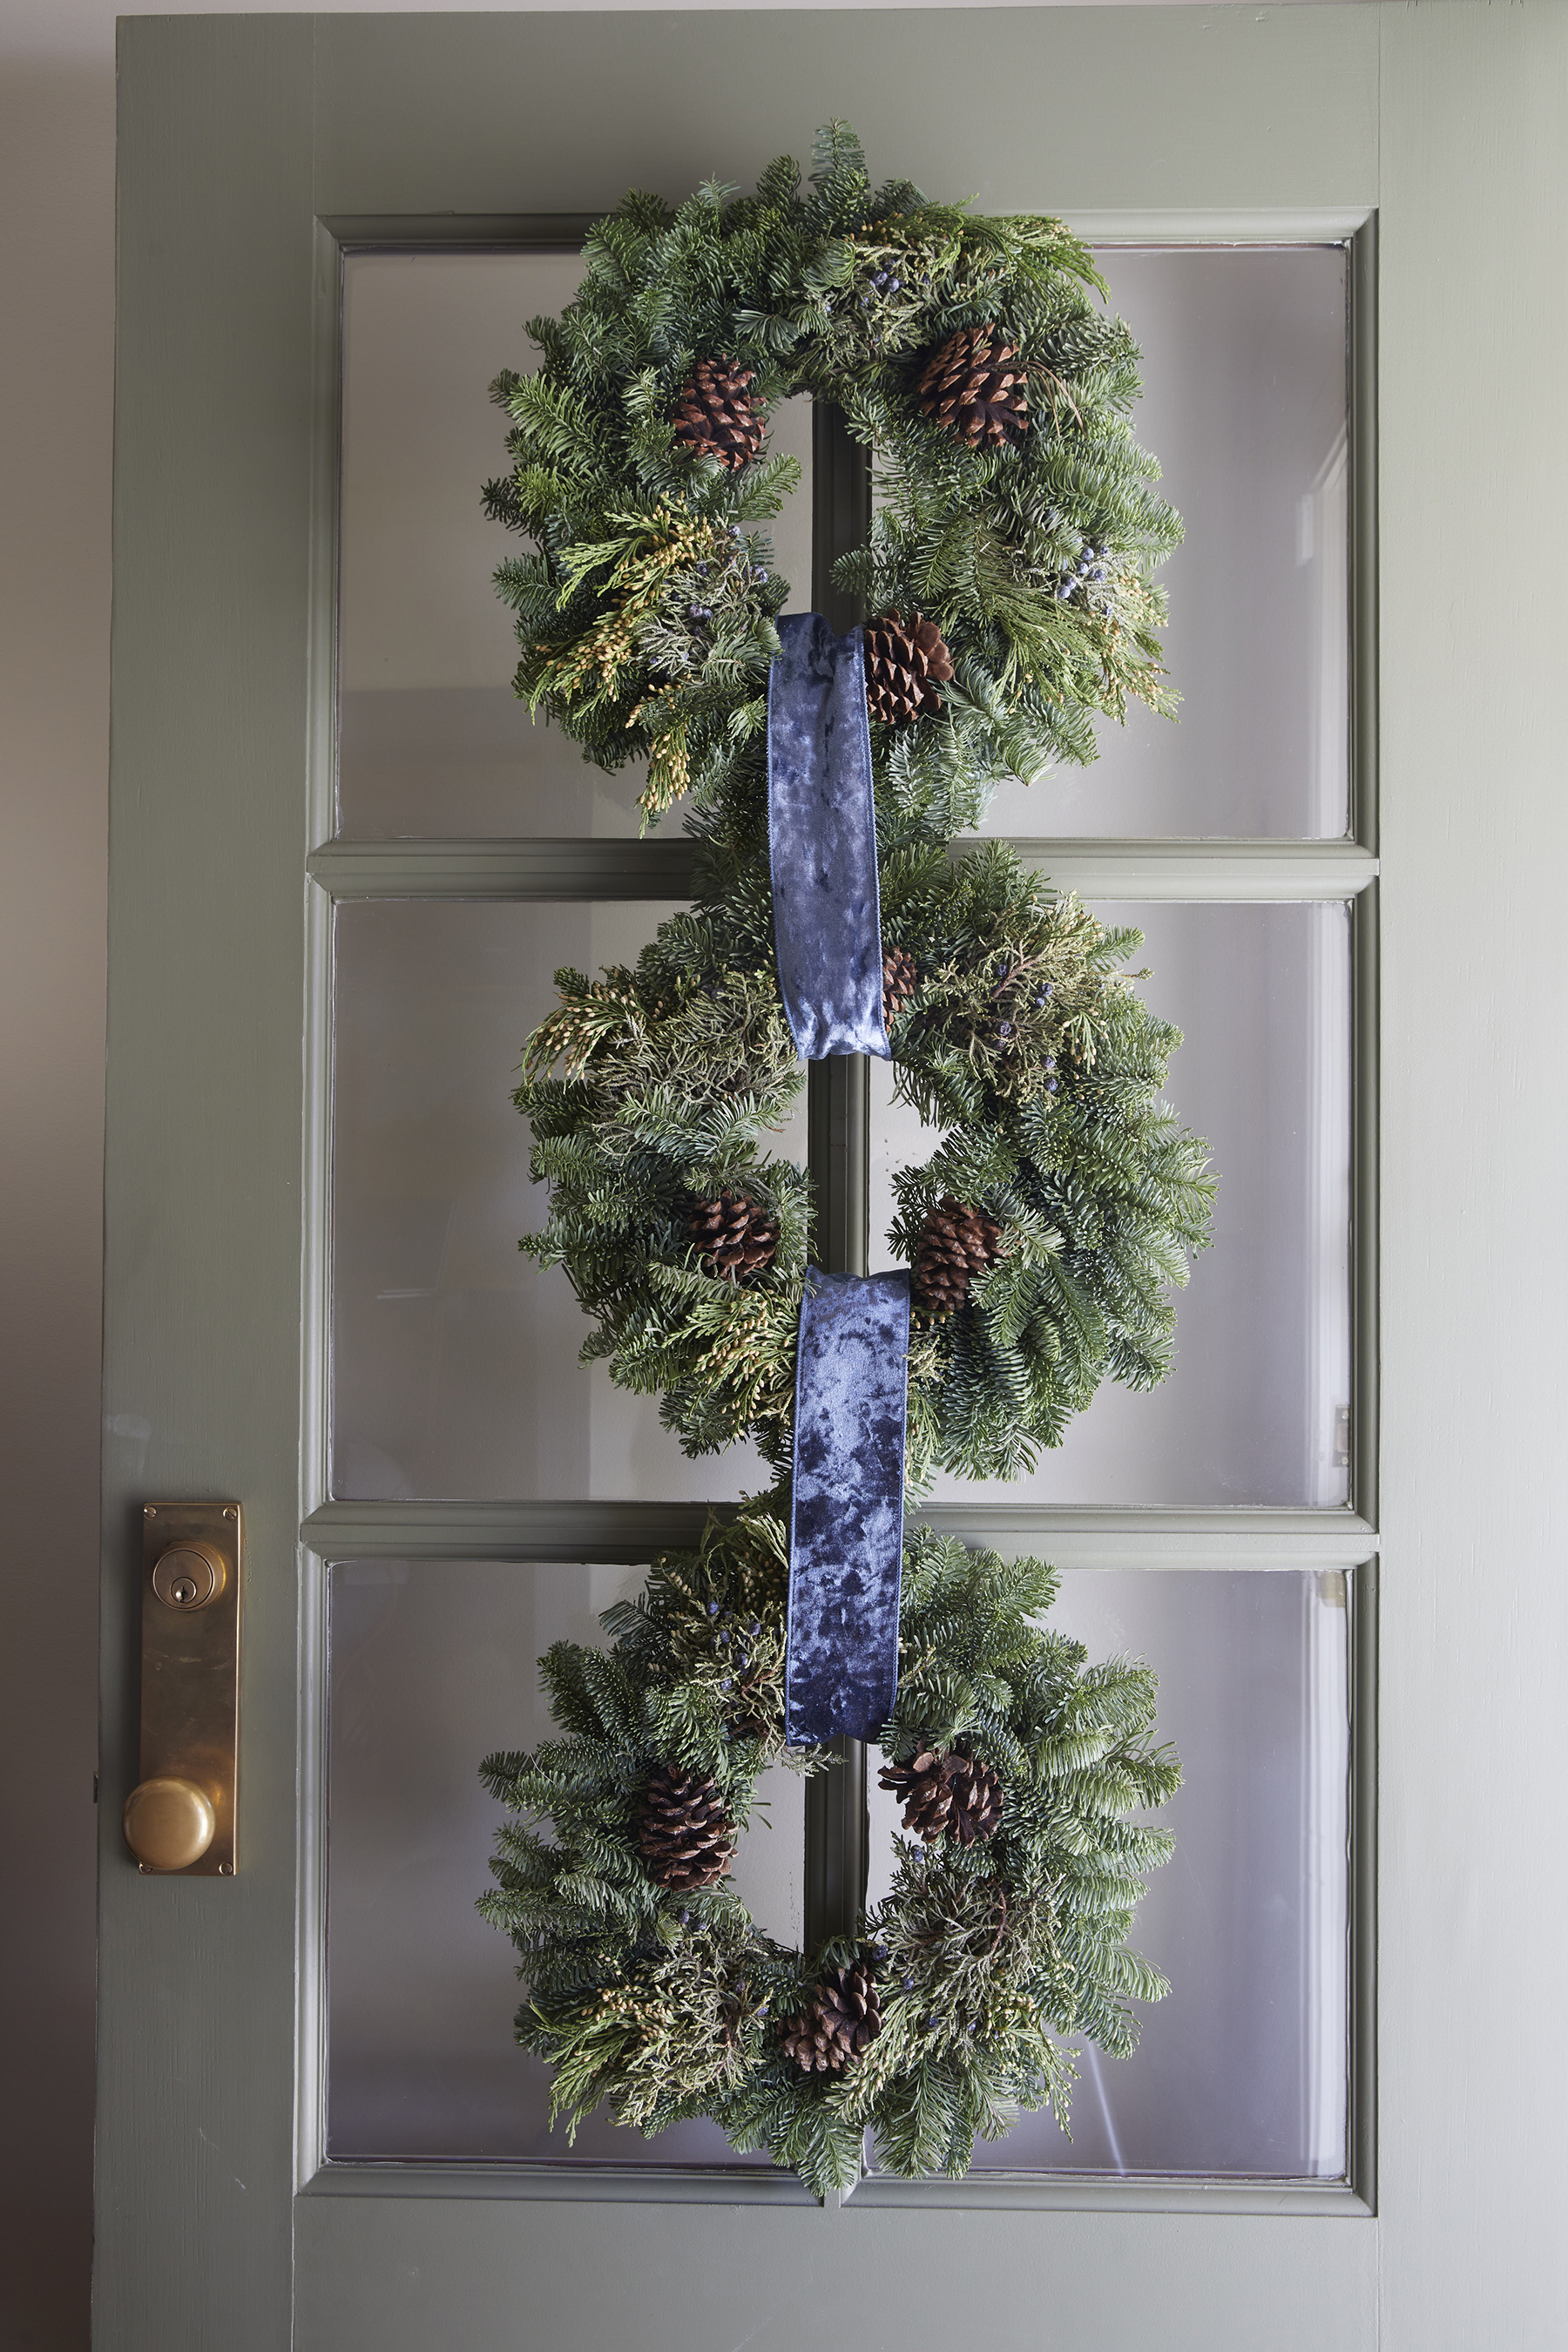 Three wreaths looped together with blue velvet ribbon hung on the front door.